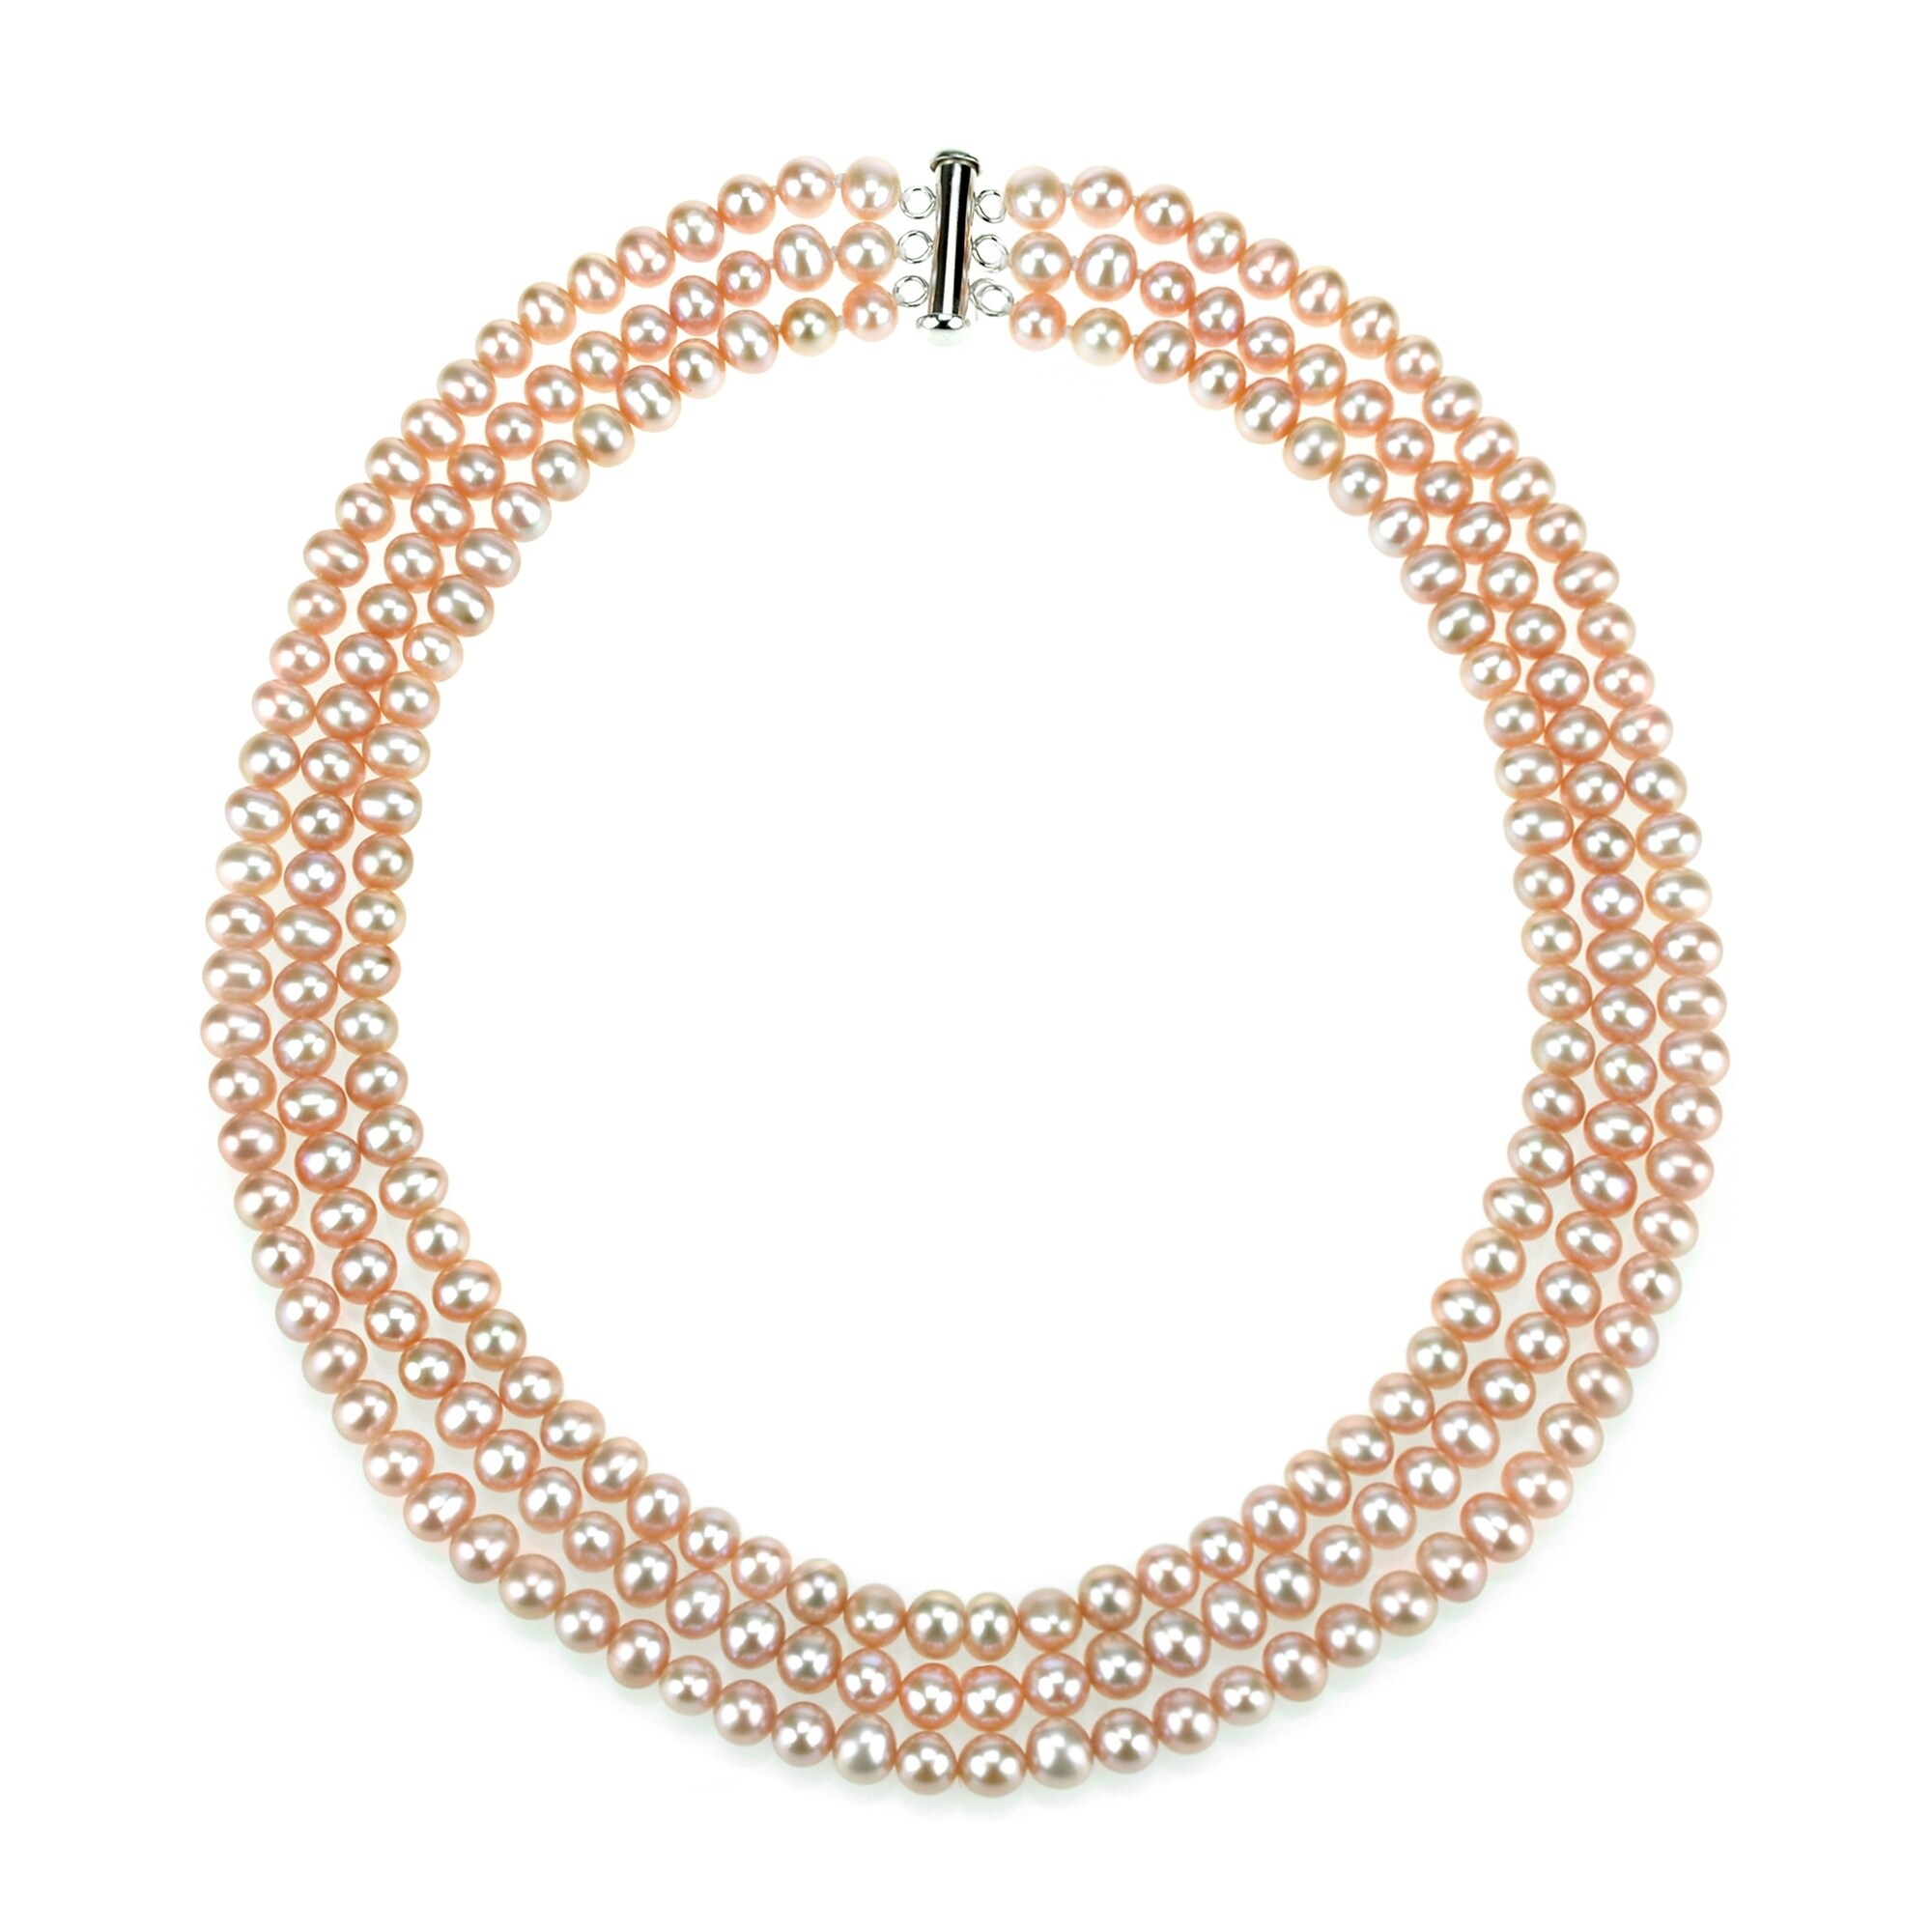 Handpicked AA 7-9mm White Peach and Grey Freshwater Cultured Pearls Sterling Silver Rhodium-Plated 3-Row Stationary Necklace 17 